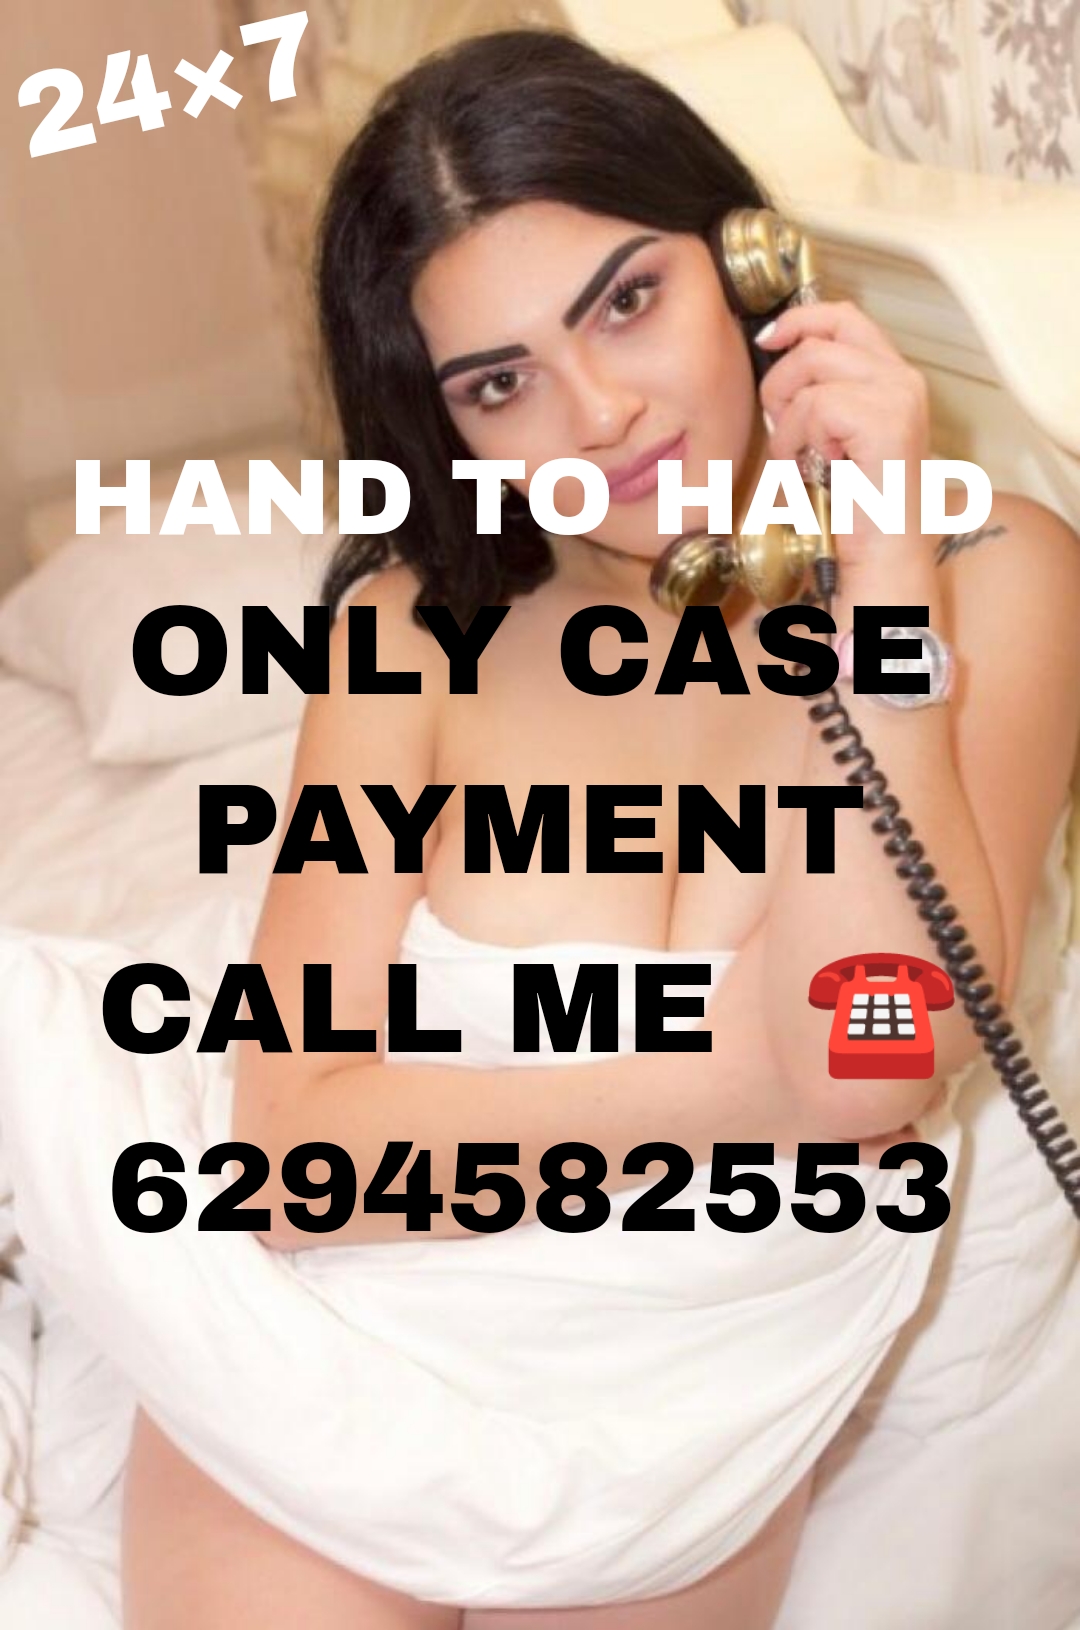 HYDERABAD OPEN SERVICE ONLY CASH PAYMENT ONLY HOTEL SERVICE